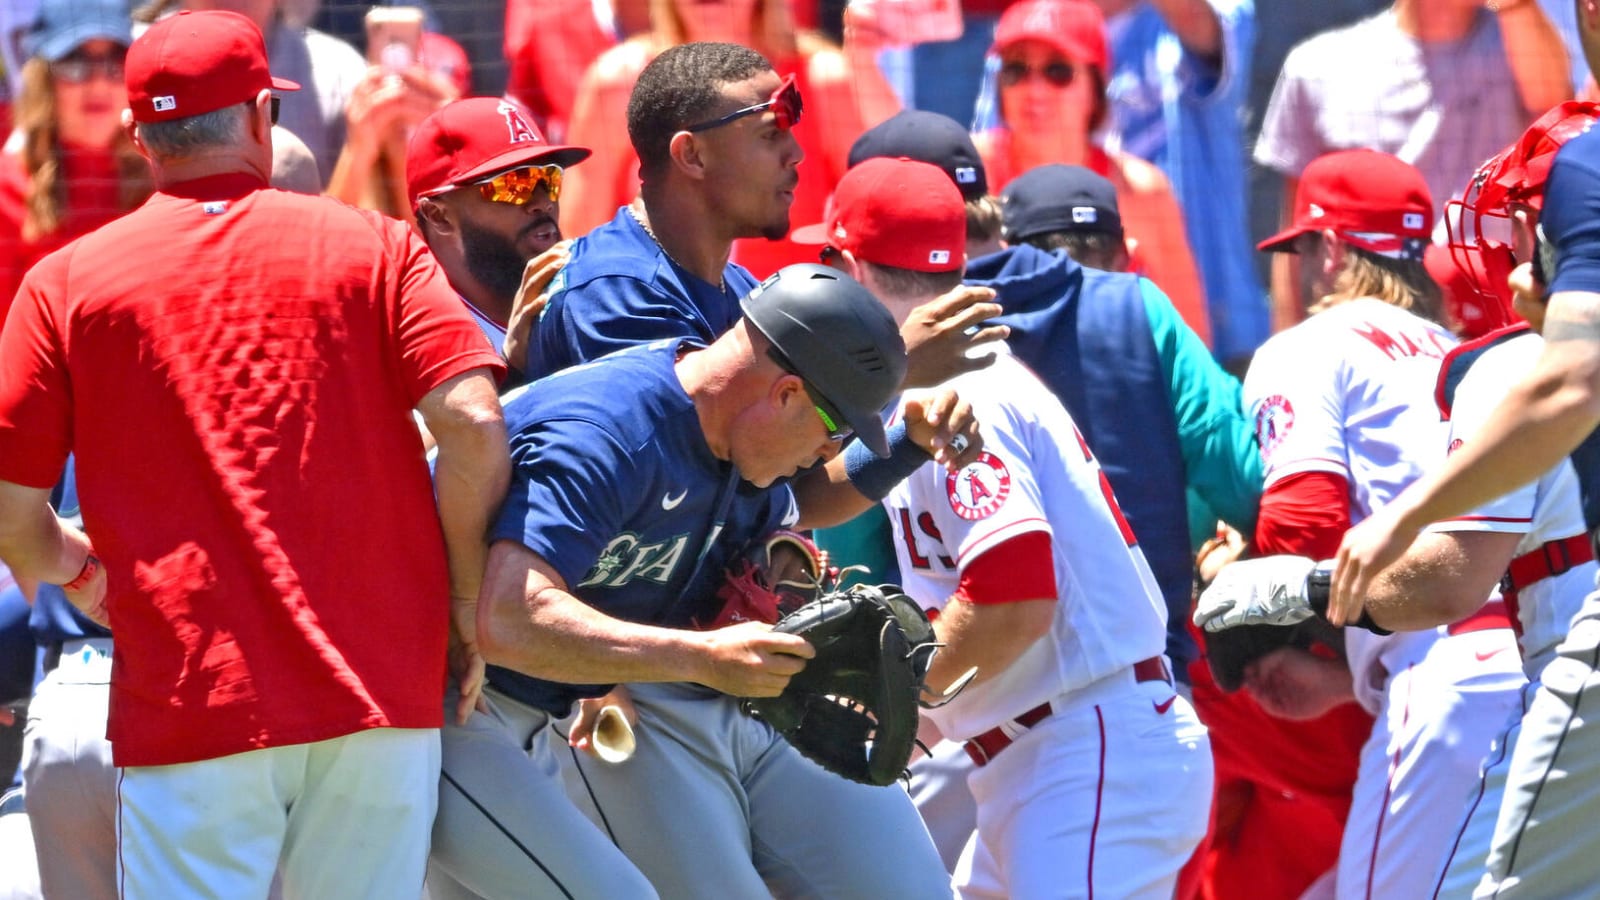 12 suspended after brawl between Angels-Mariners